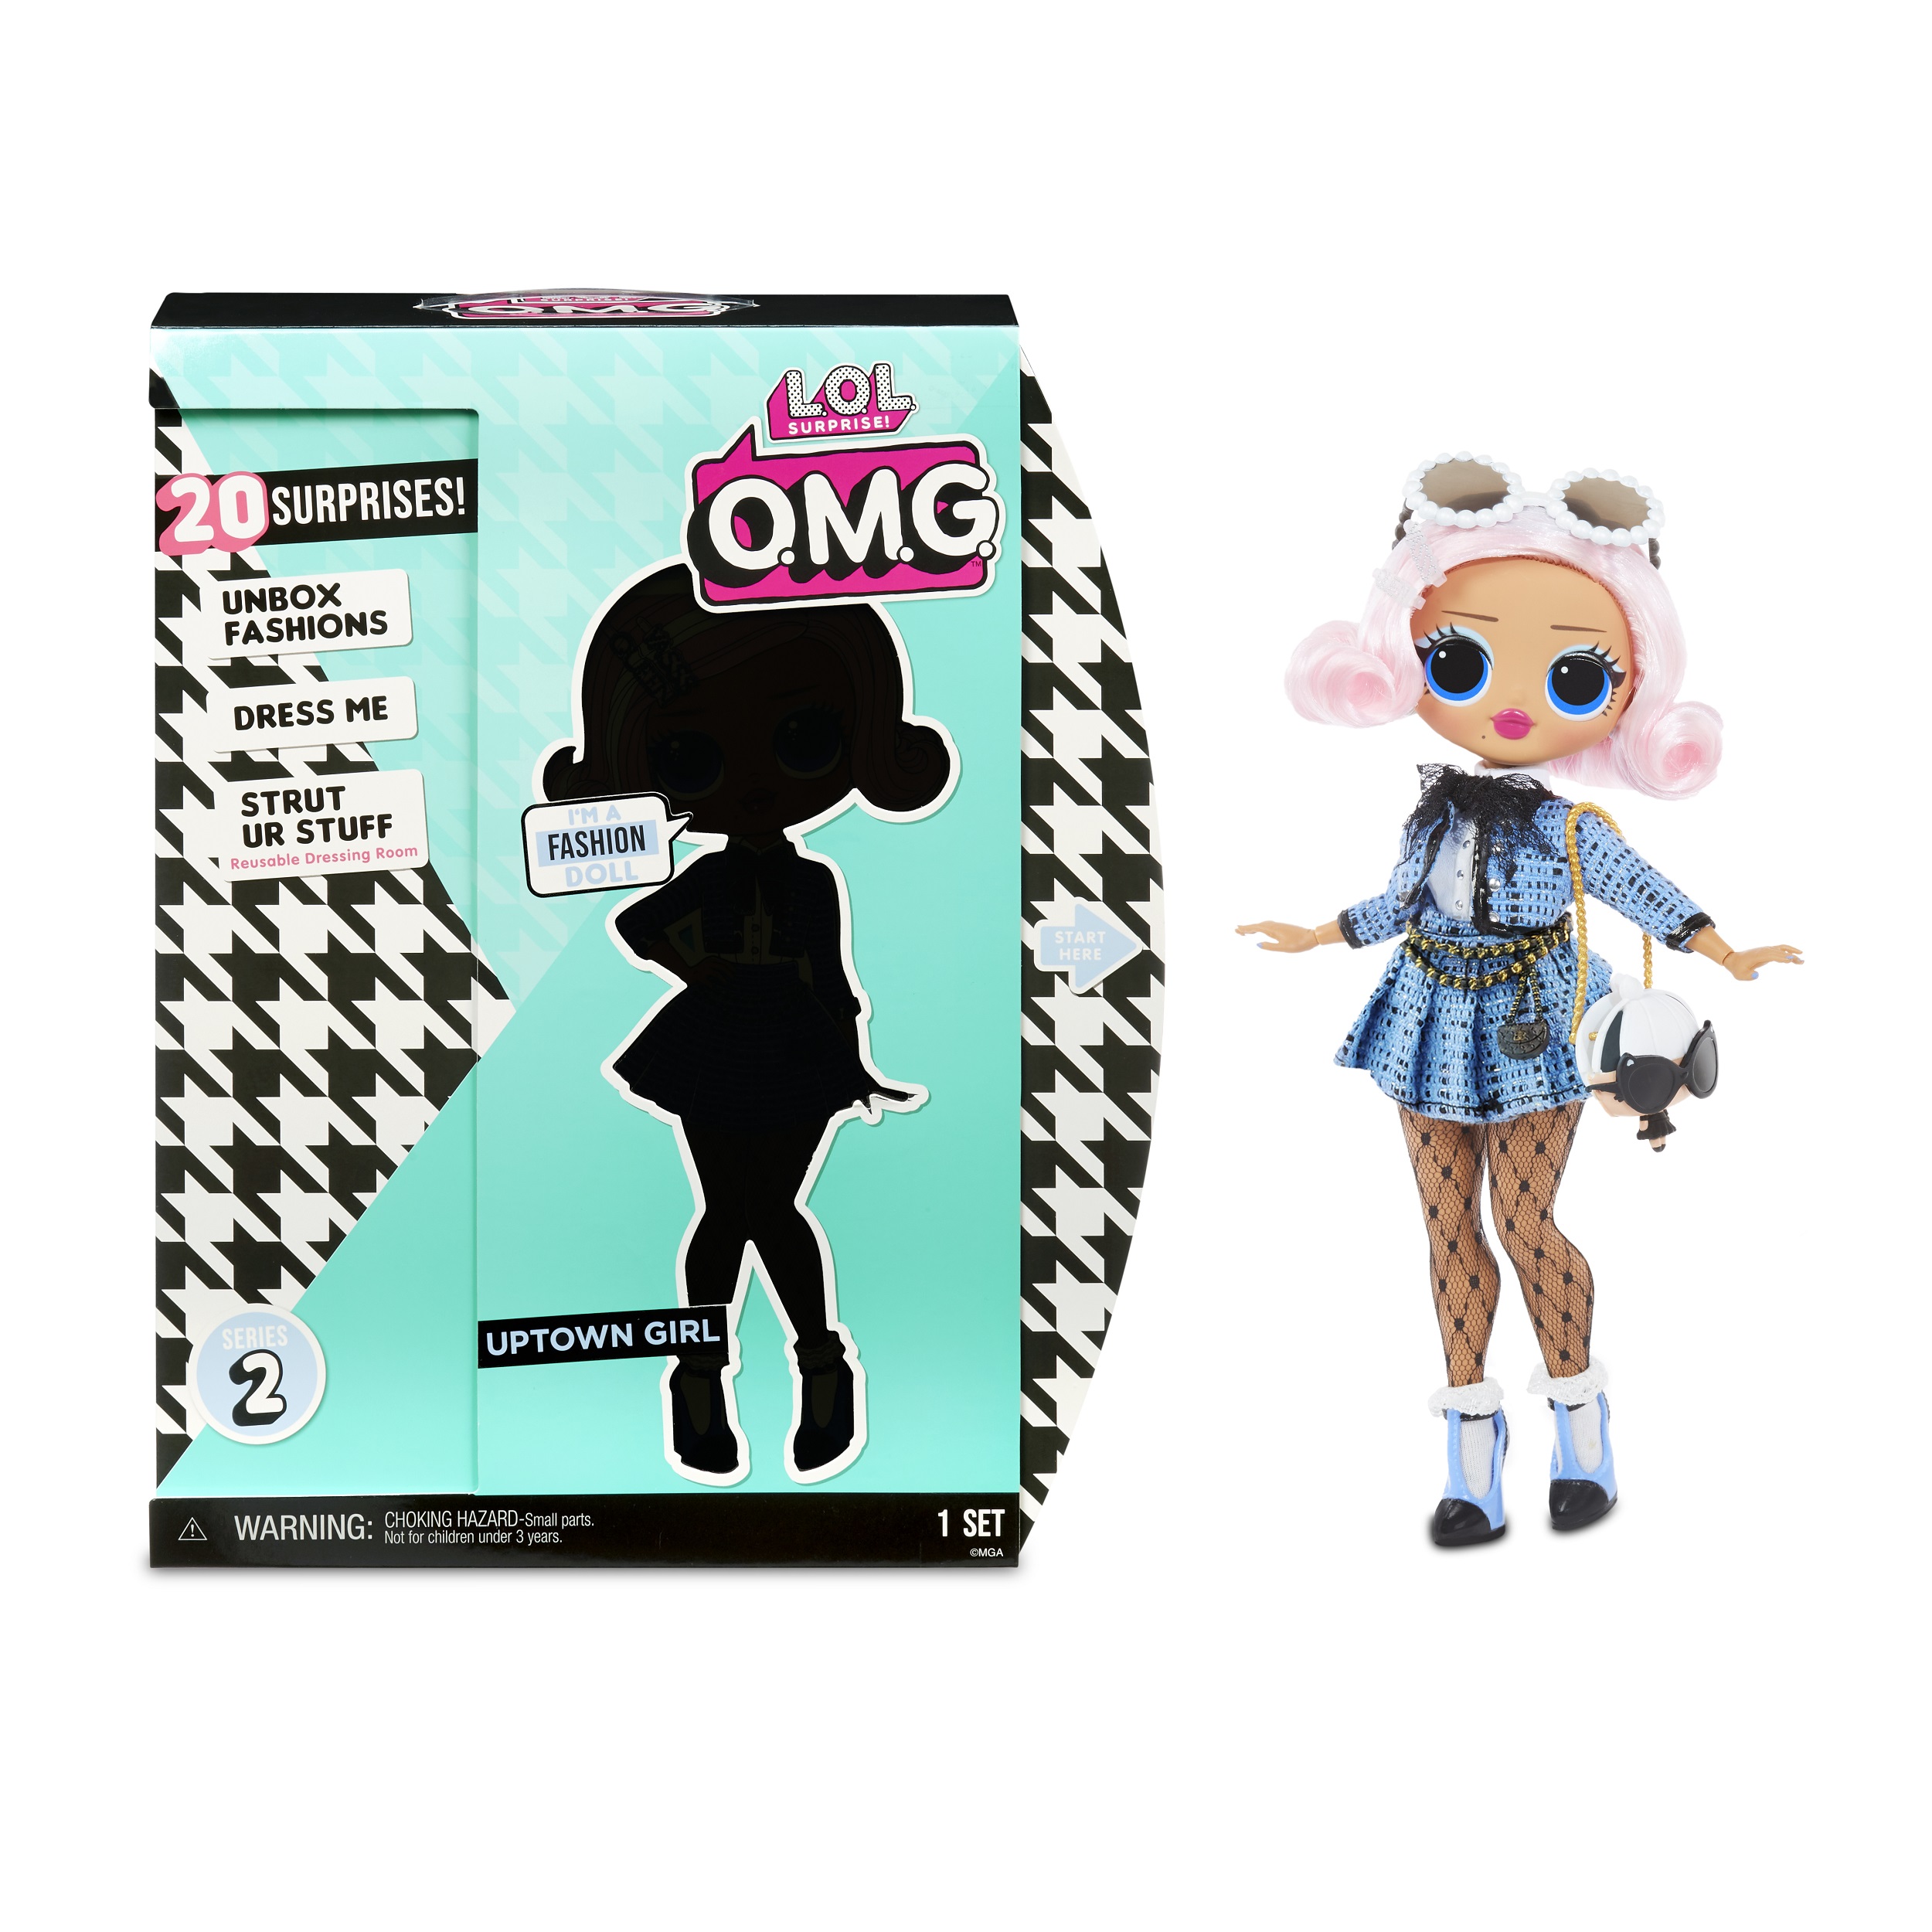 L.O.L Surprise O.M.G. Uptown Girl Fashion Doll with 20 Surprises